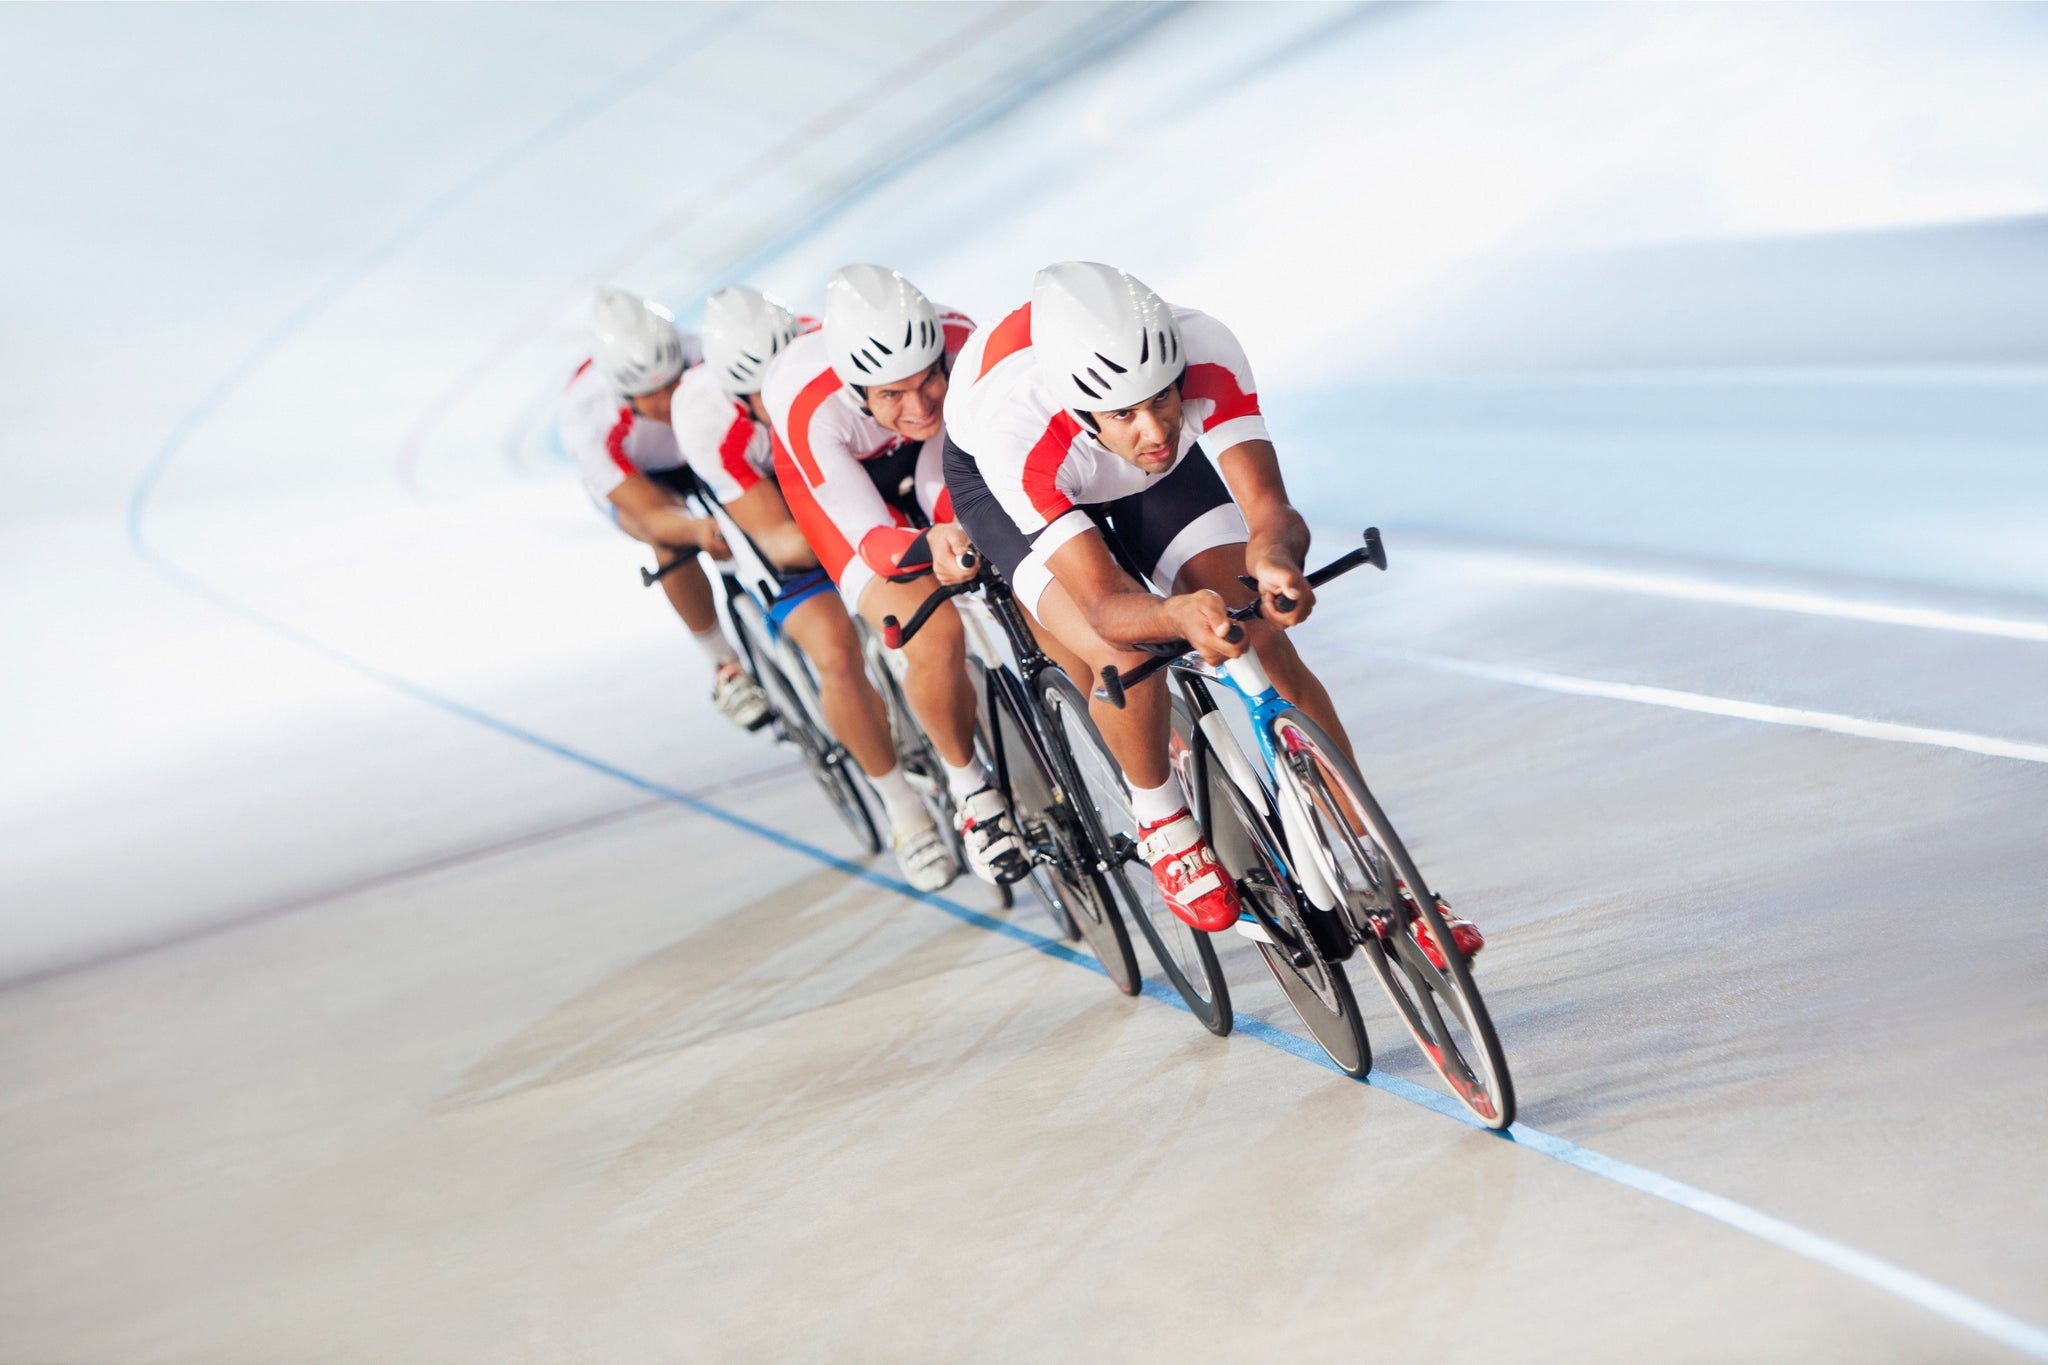 Cycling team in full gear after taking collagen protein for athletes are speeding around banked tracks during a competition